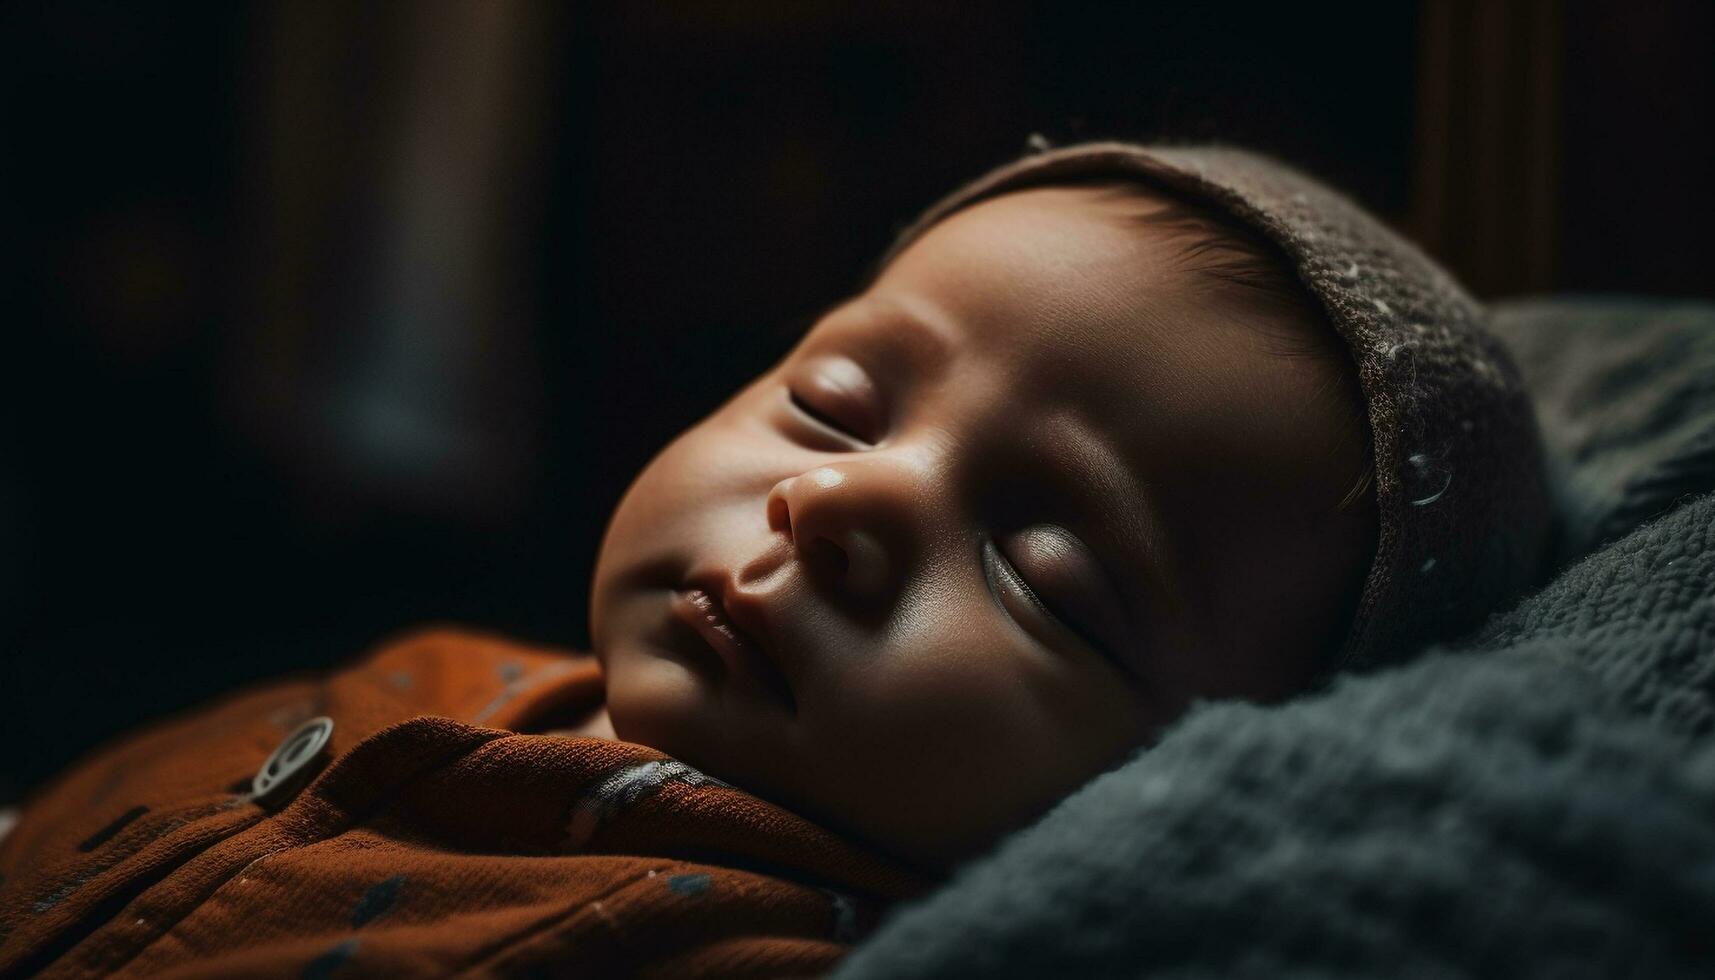 Cute Caucasian baby boy sleeping peacefully, a portrait of innocence generated by AI photo